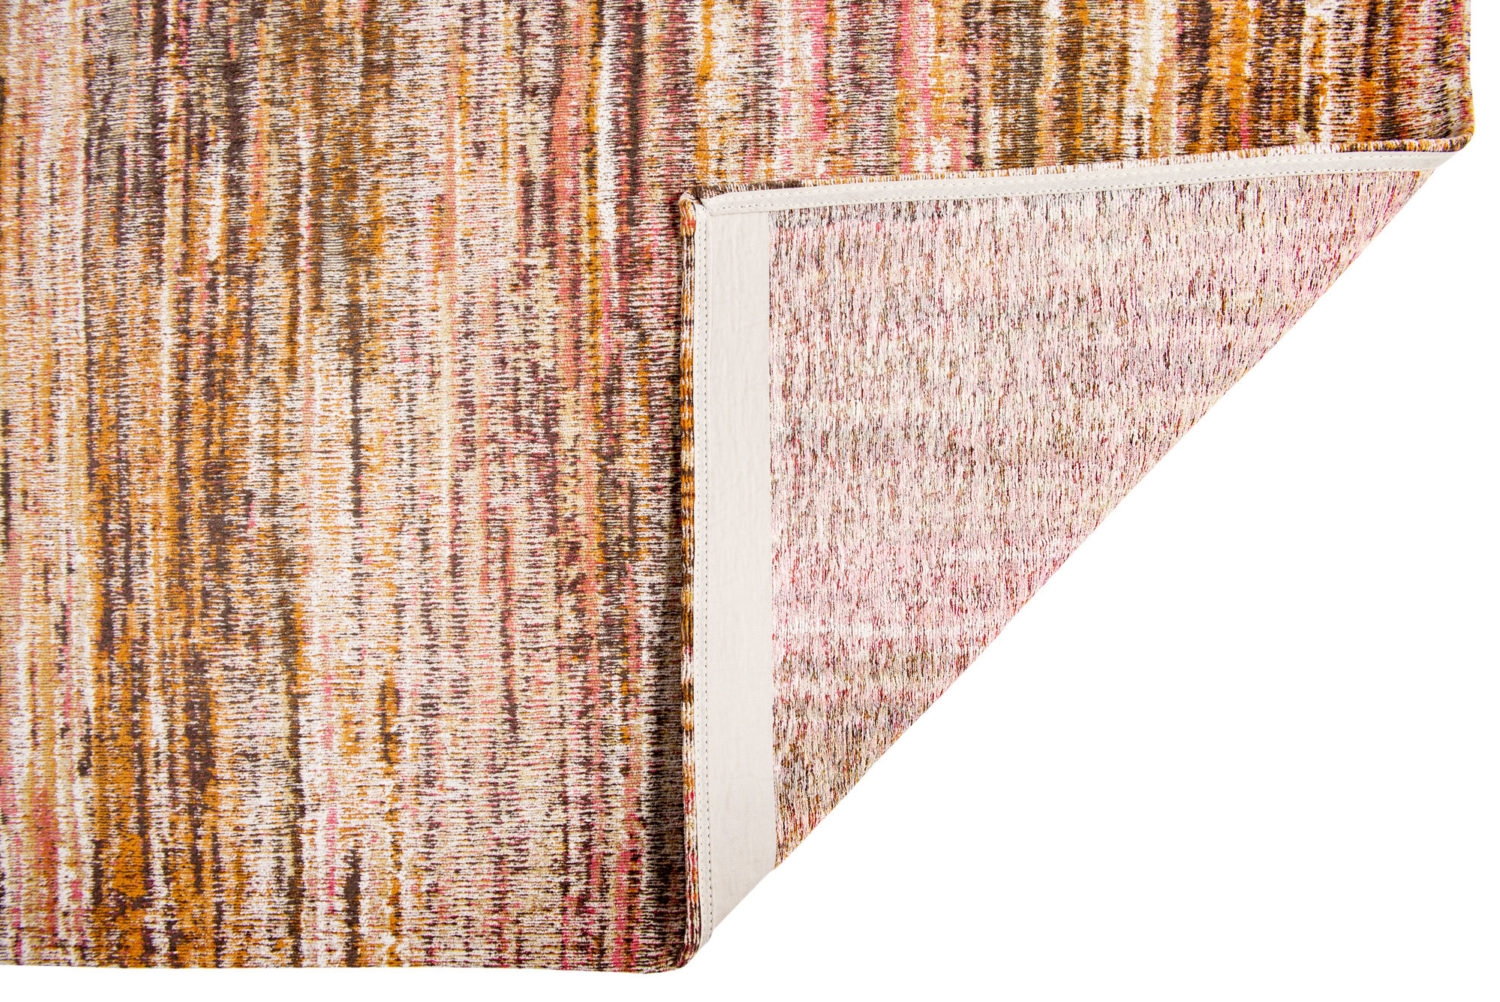 Sari is inspired by the Indian rugs made of Sari silk leftovers